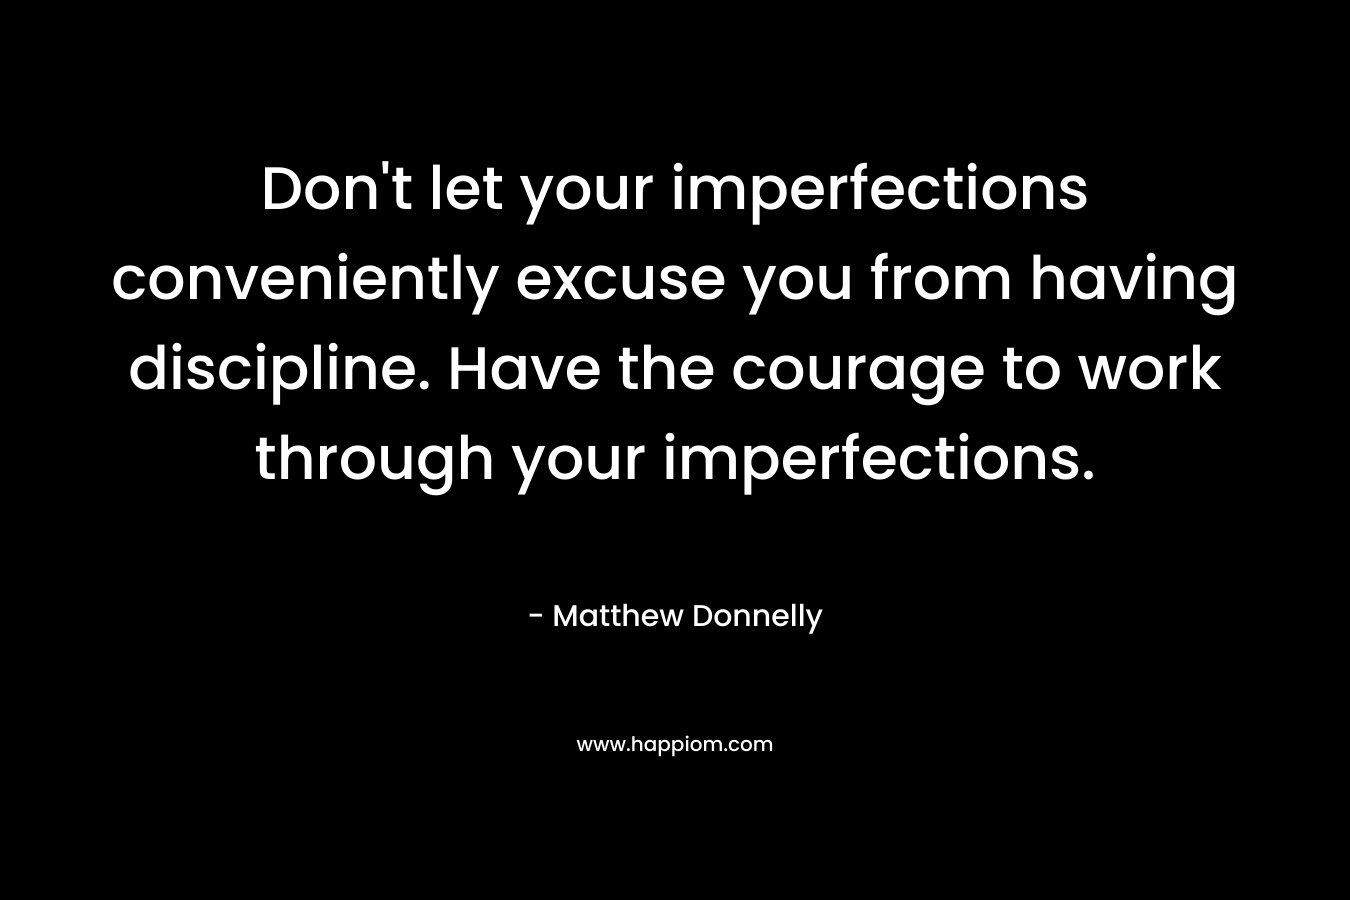 Don't let your imperfections conveniently excuse you from having discipline. Have the courage to work through your imperfections.